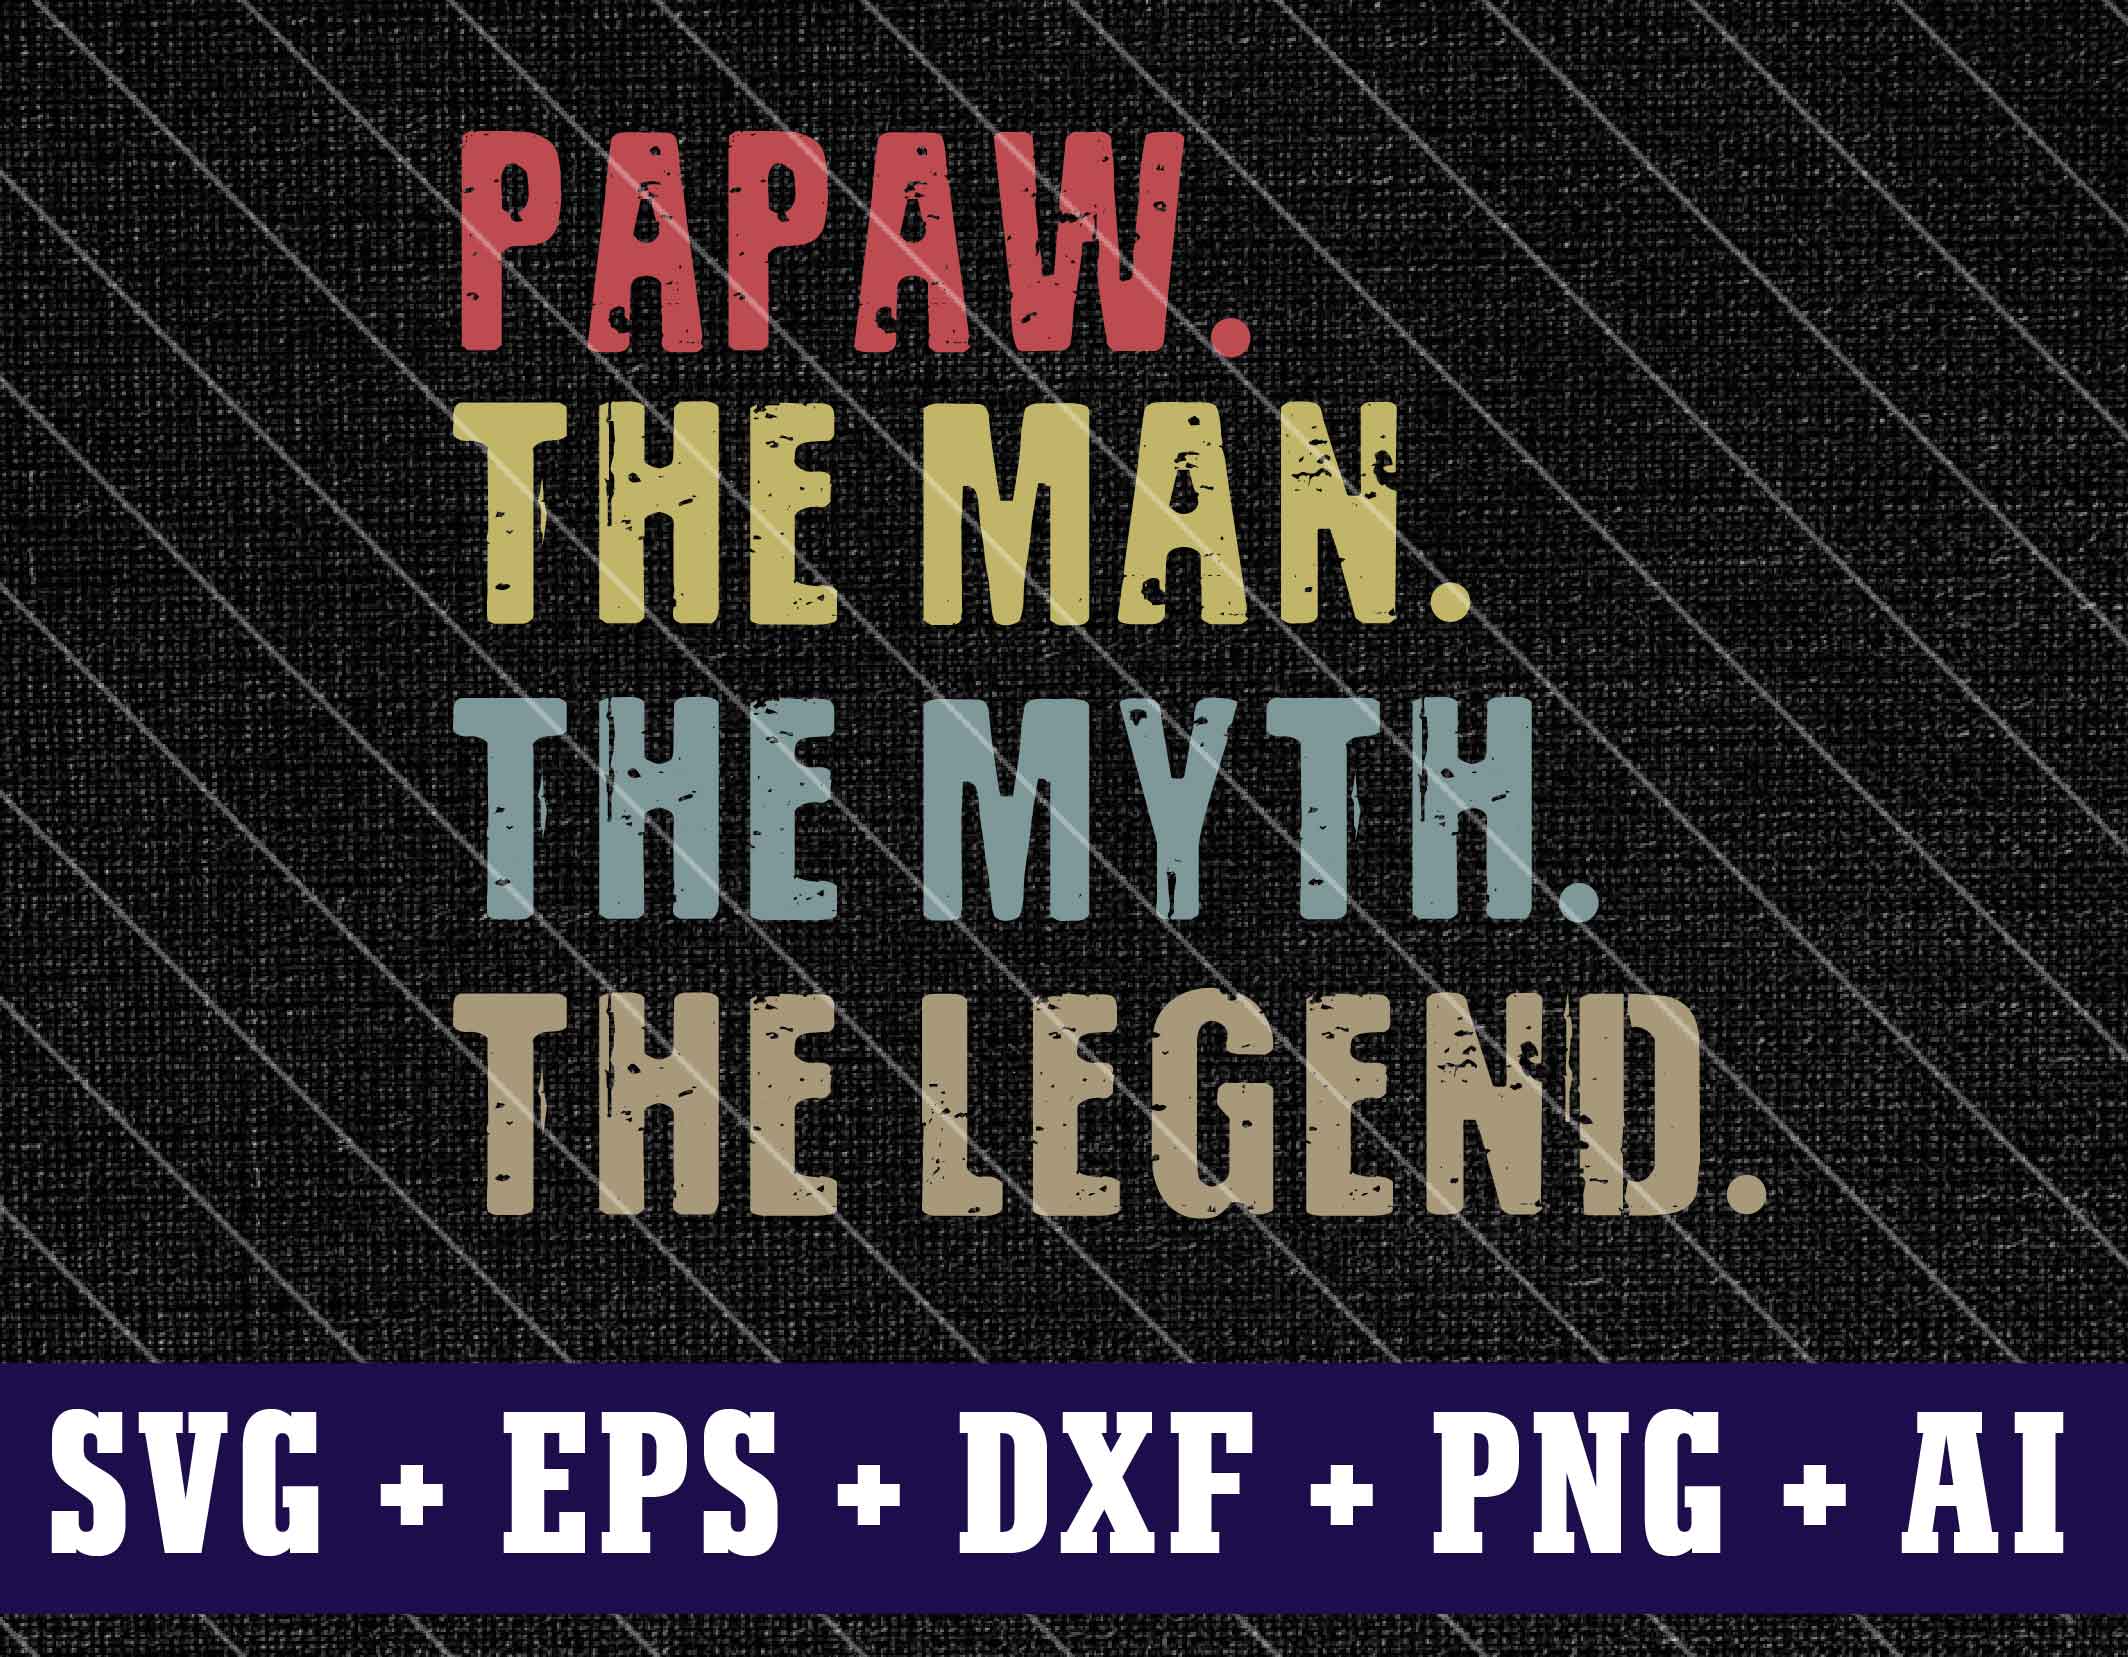 Papa SvG, Pappy The Man The Myth The Legend SvG, Dad, Grandpa SvG, Distressed, Vintage, Vector, Shirt Design for Cricut, Instant Download